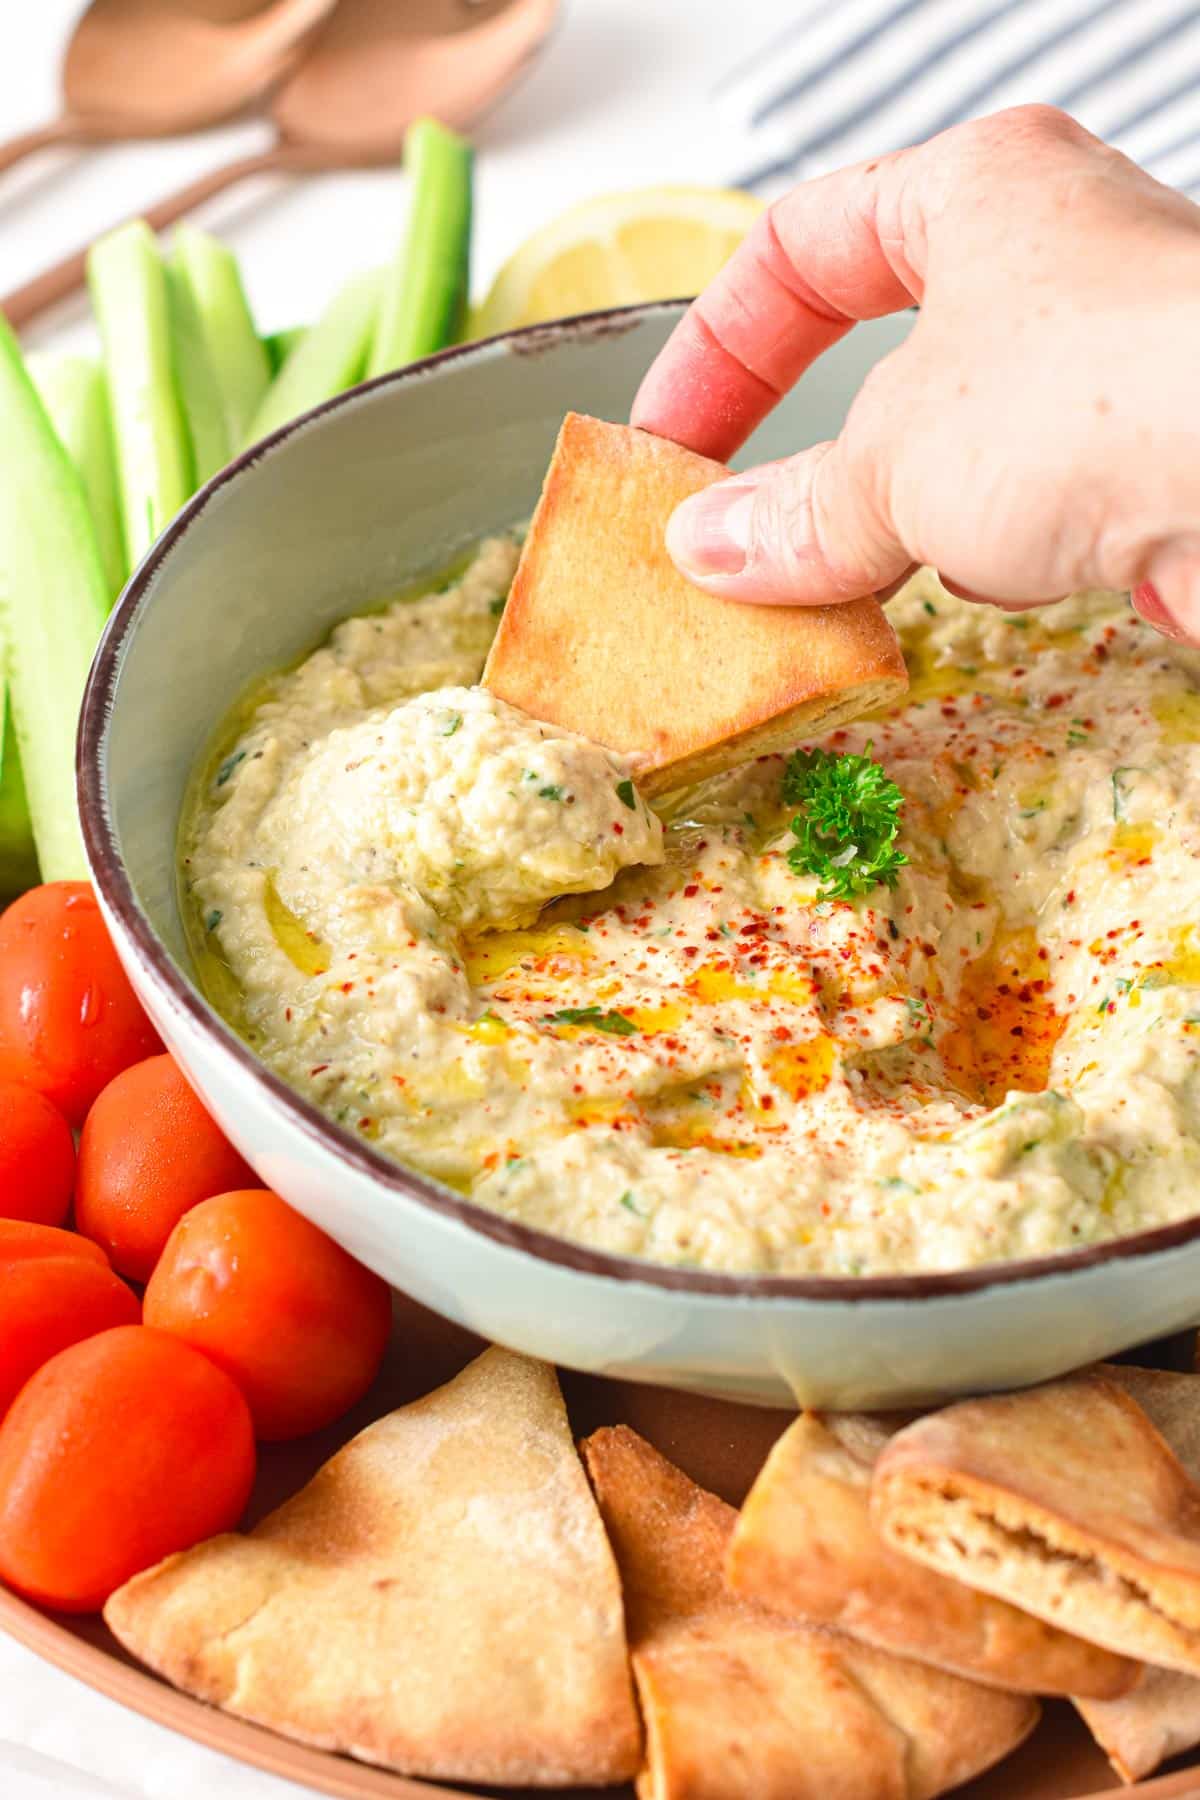 This Eggplant Dip also called Baba Ganoush recipe is a creamy Meditareean dip made from roasted eggplants, tahini and garlic. It's a delicious appetizer or spread for lunch wraps and sandwiches.